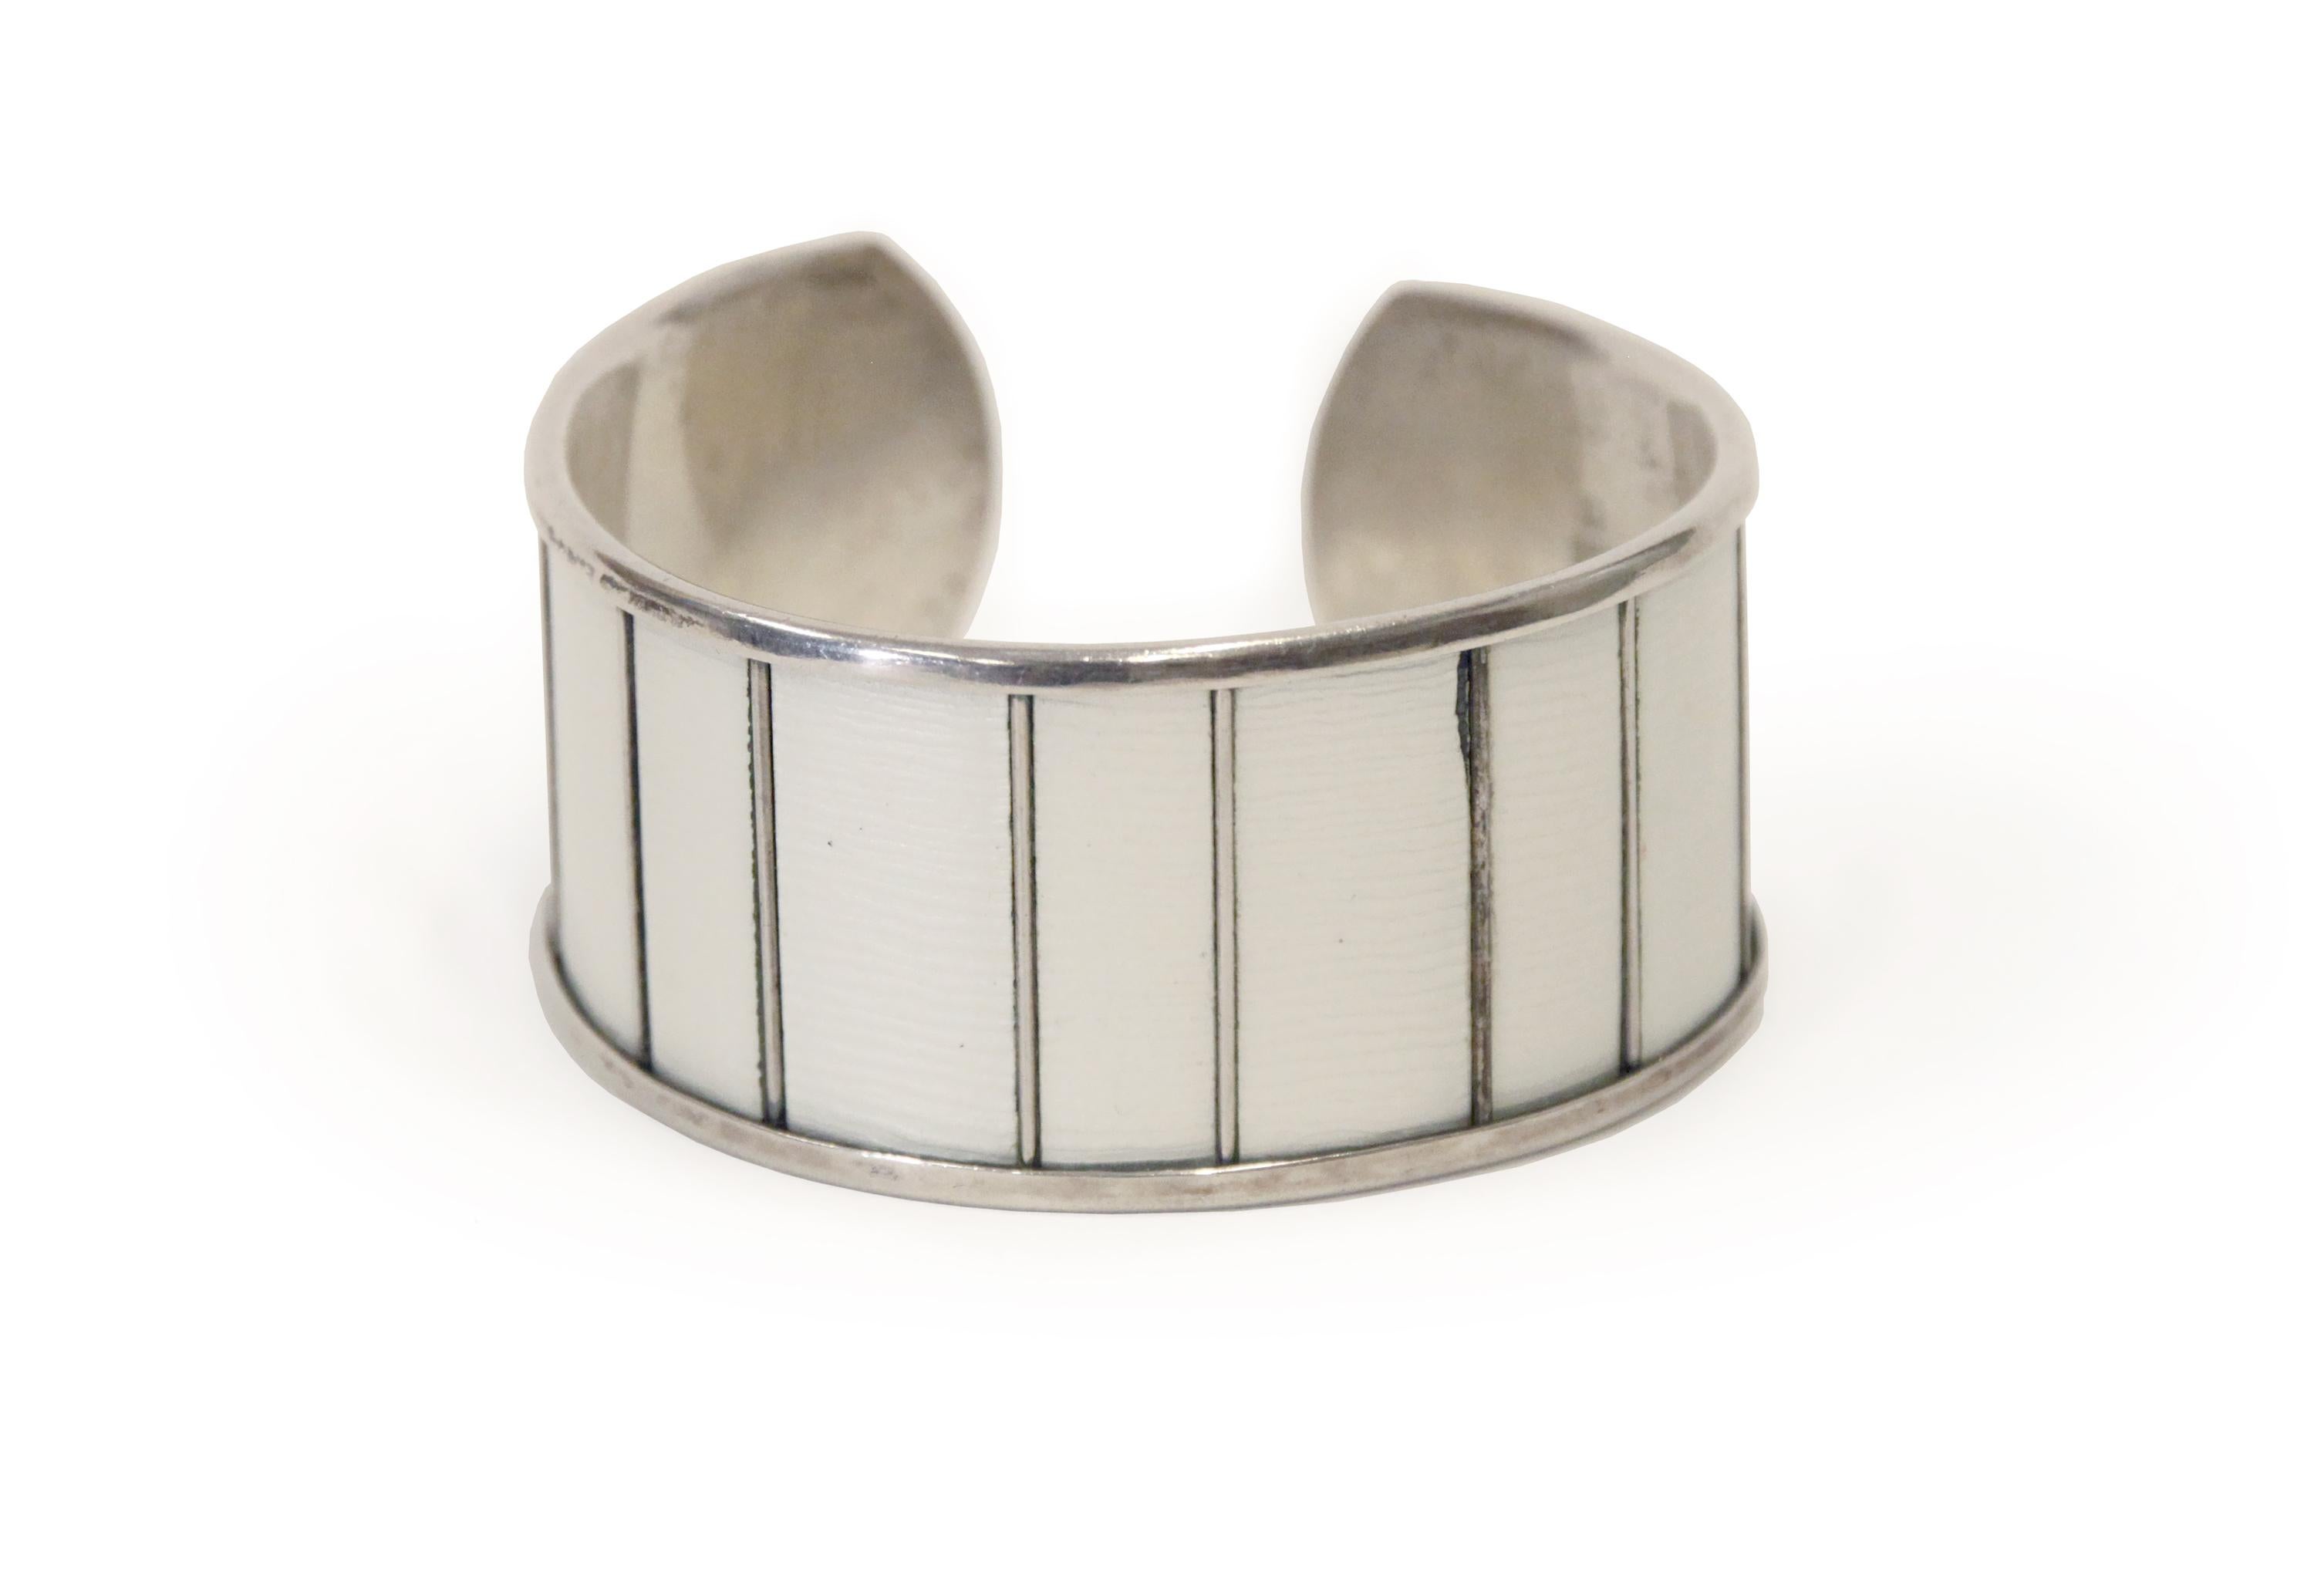 Sublime cuff bracelet in off-white enamel and silver. Designed by Grete Prytz Kittelsen for J. Tostrup from 1950s first half. The bracelet in is good vintage condition with a minor chip on the enamel (see picture). A very rare piece of Norwegian mid